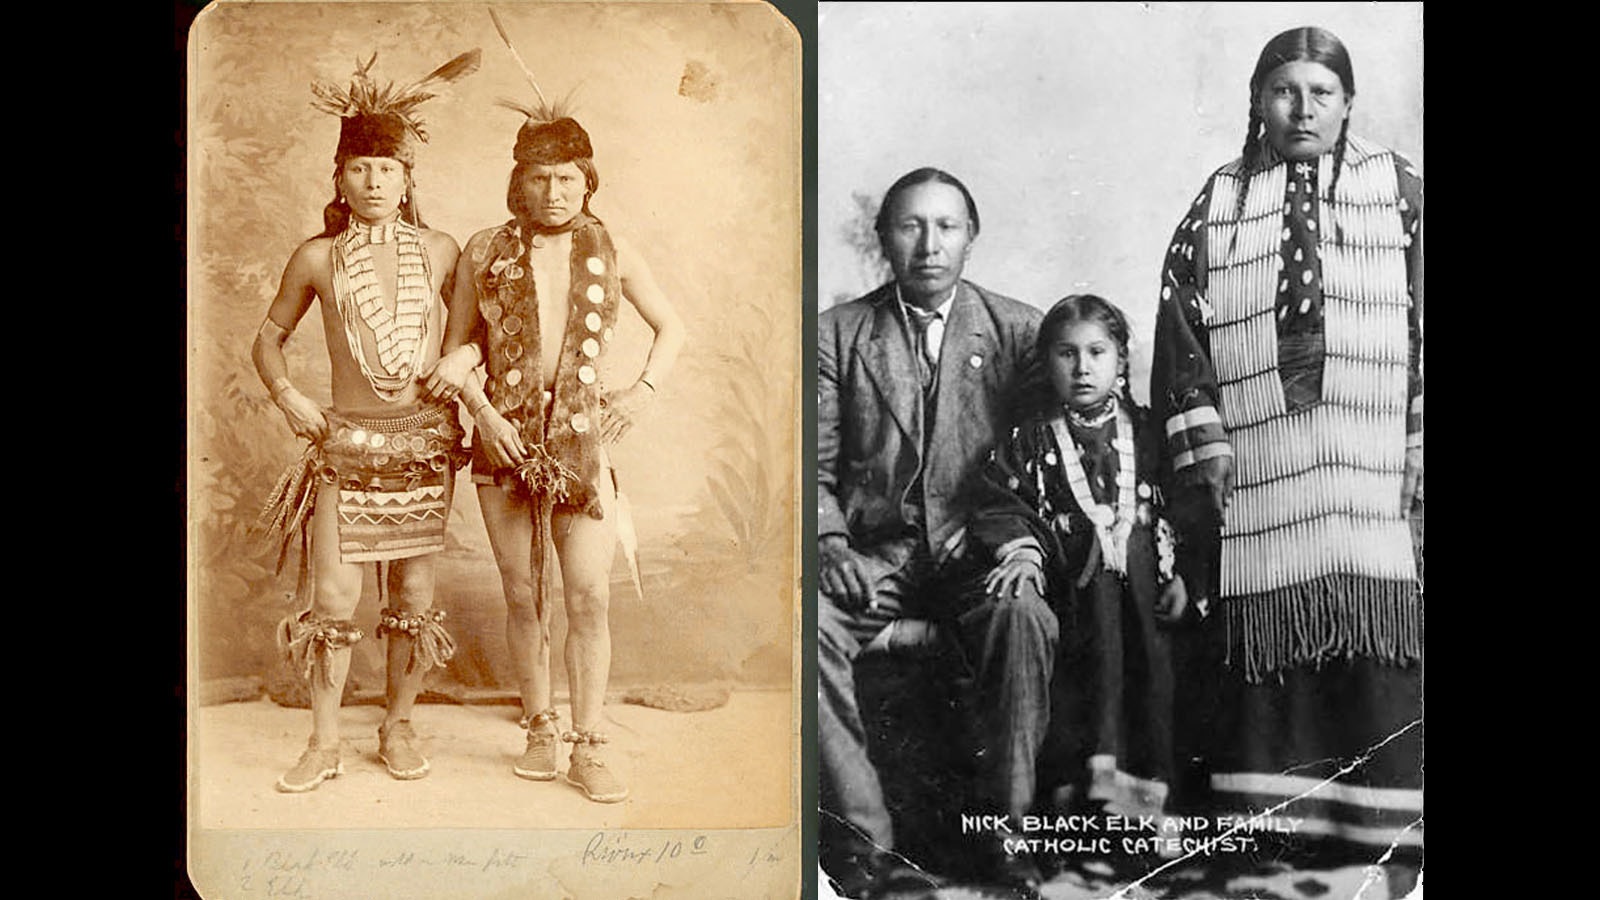 Black Elk, a Lakota medicine man, far left, later converted to Christianity and took the name Nicholas as well, right.